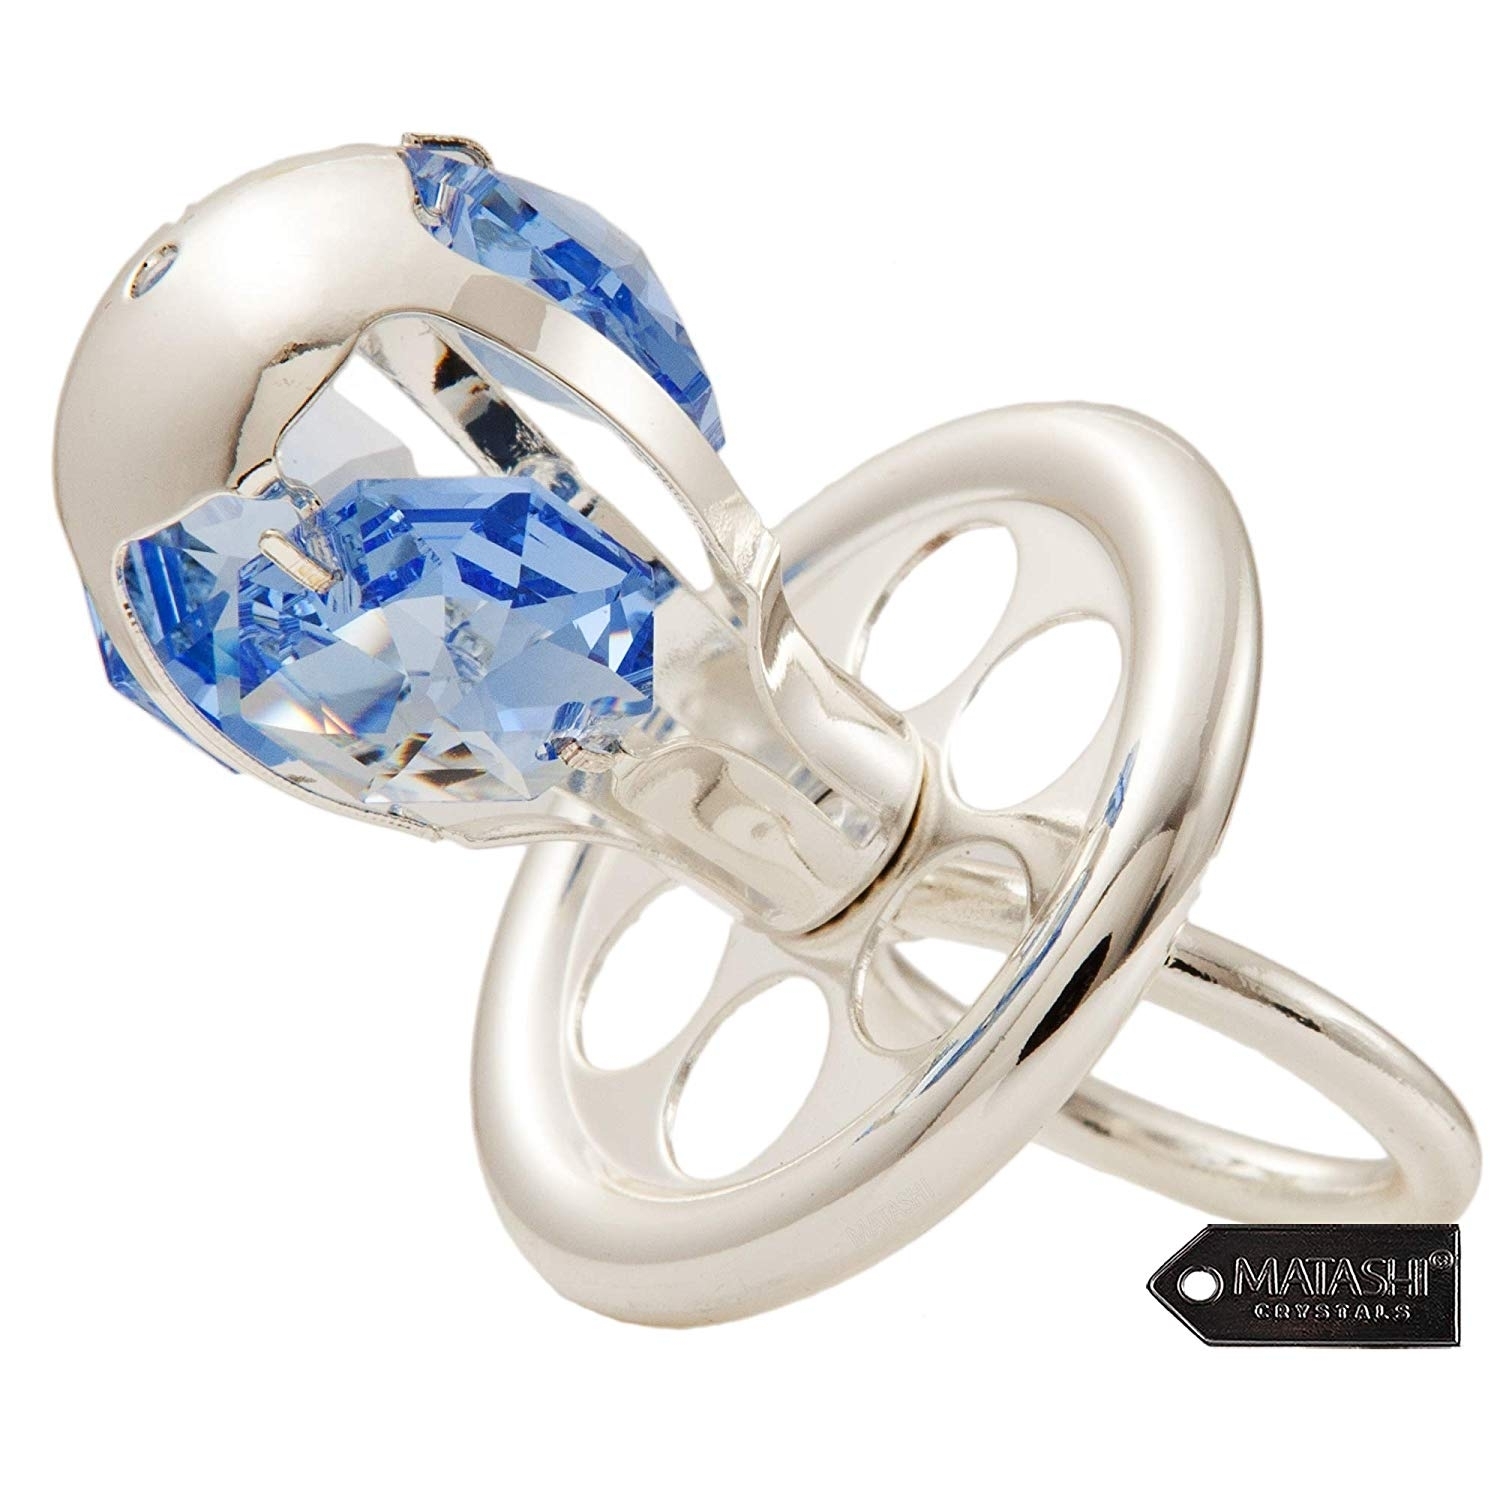 Silver Plated Pacifier With Blue Crystals Ornament With Velvet Pouch By Matashi